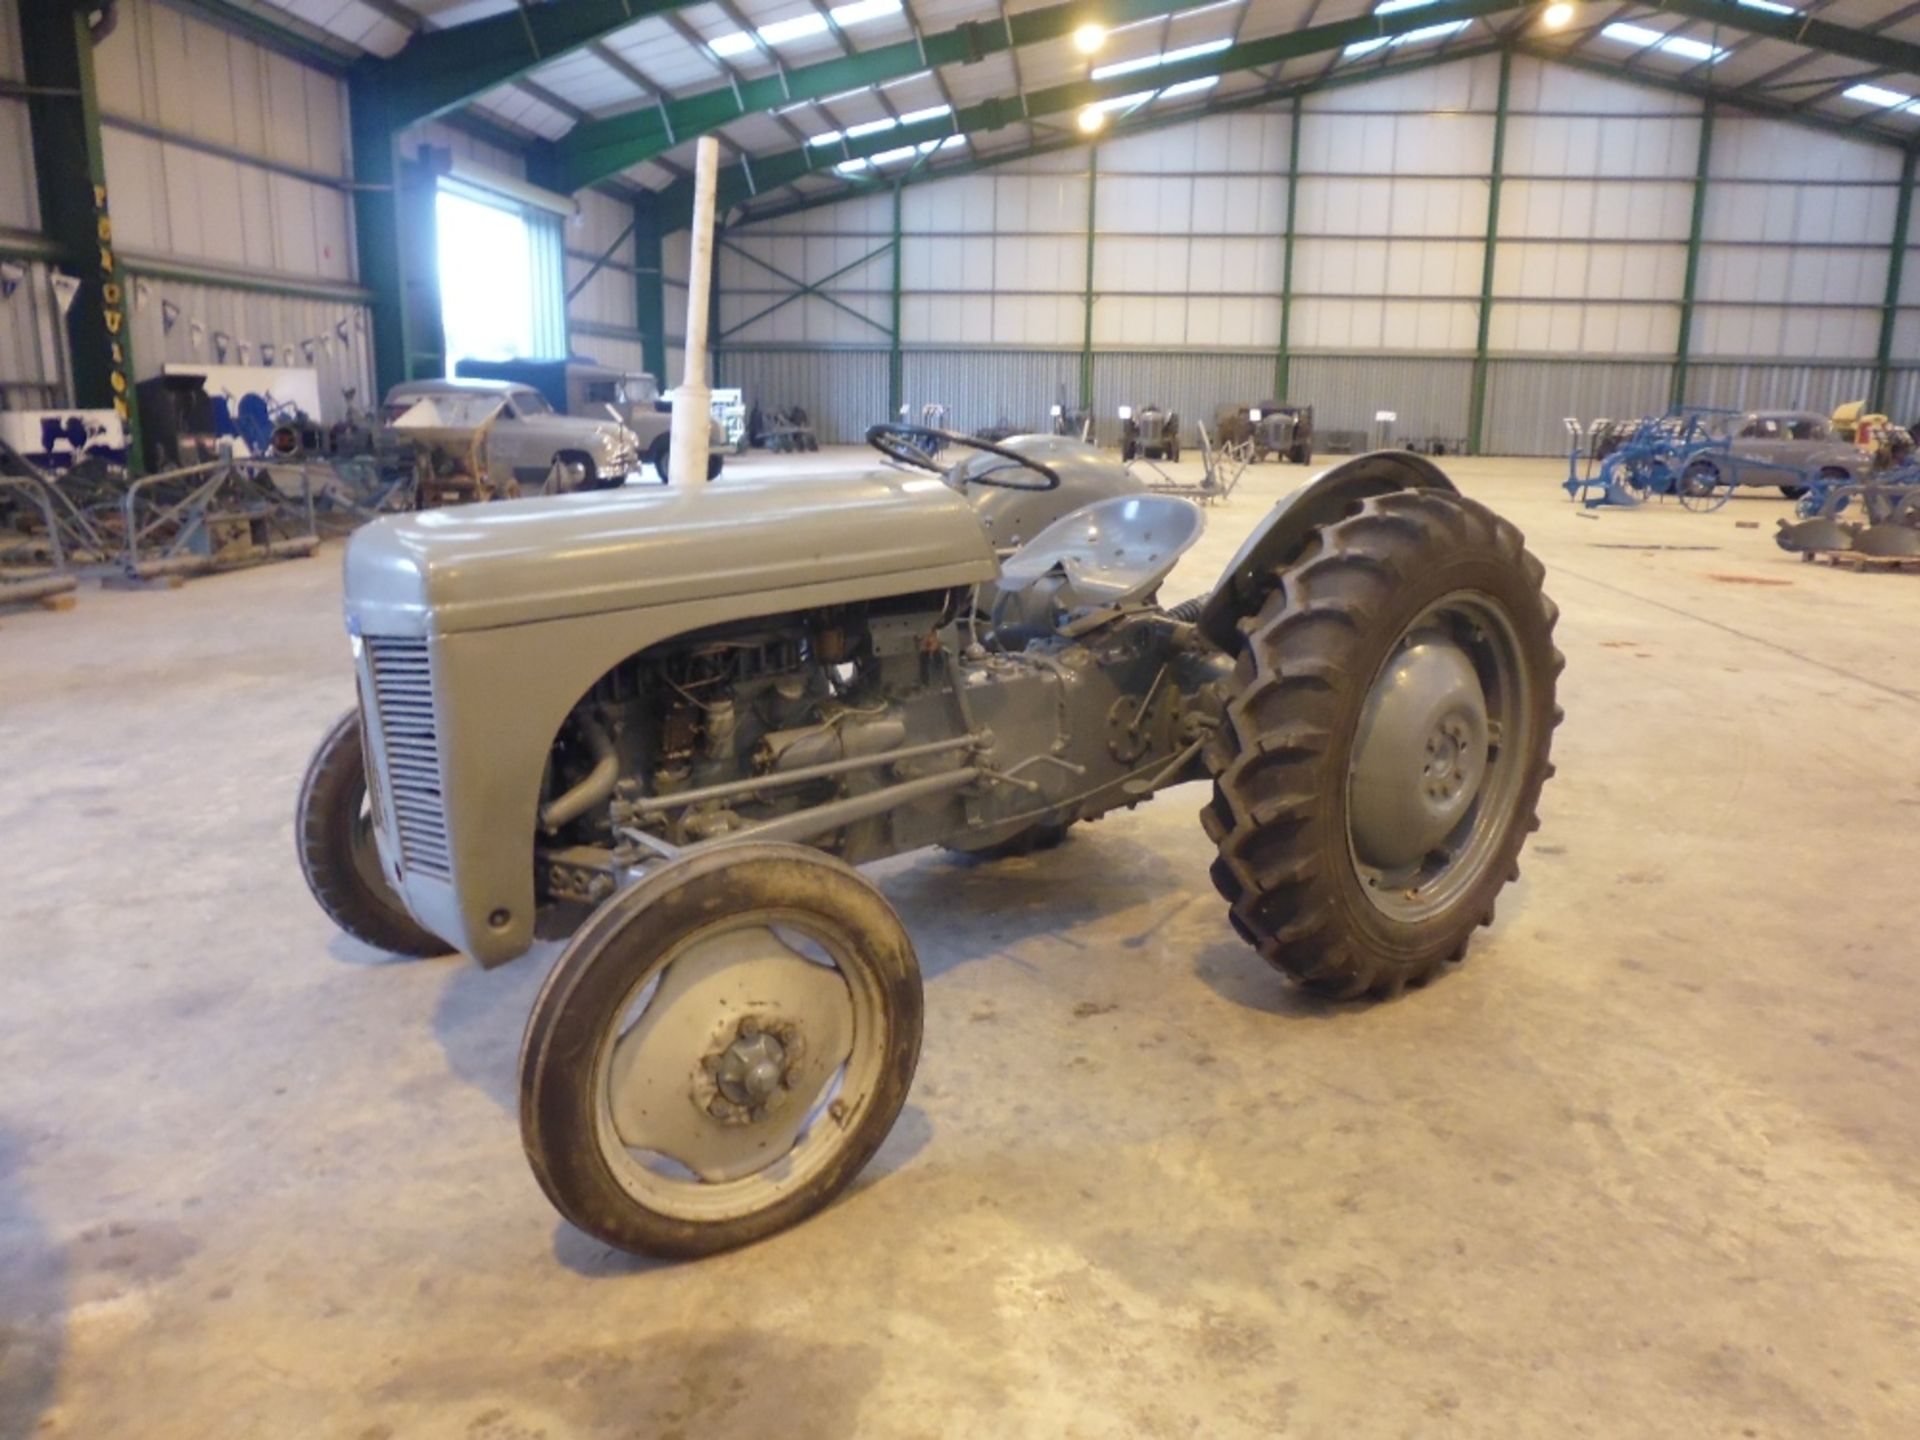 1950 FERGUSON TE-D20 4cylinder petrol/paraffin TRACTOR Reg No: 472 XUA Serial No: TED141665 Fitted - Image 2 of 4